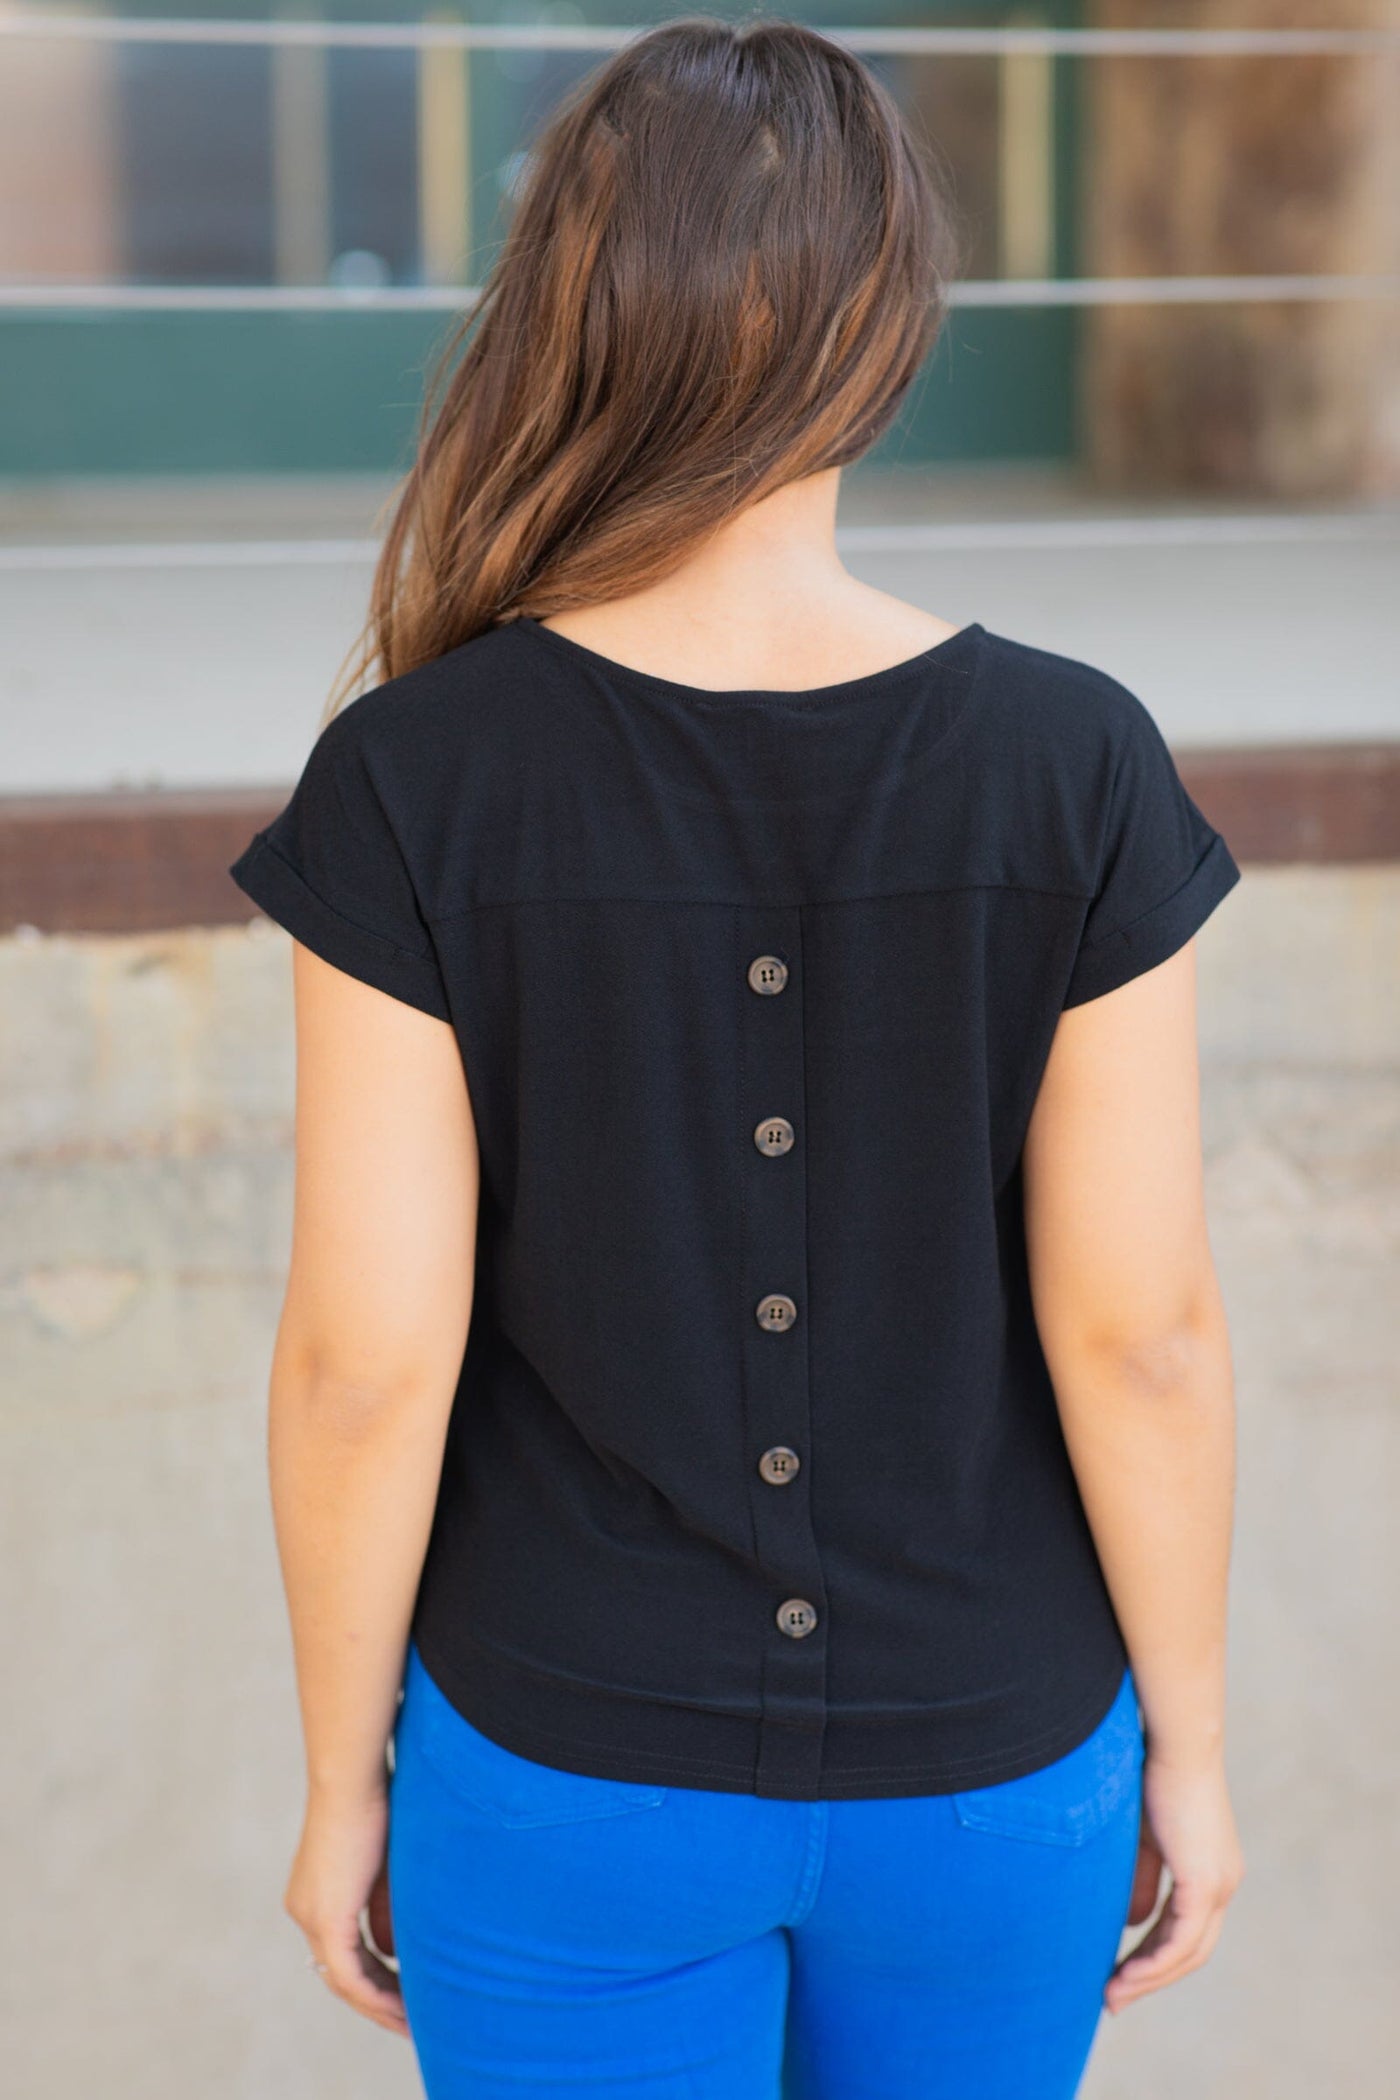 Black Top With Crochet Stripe Detail - Filly Flair